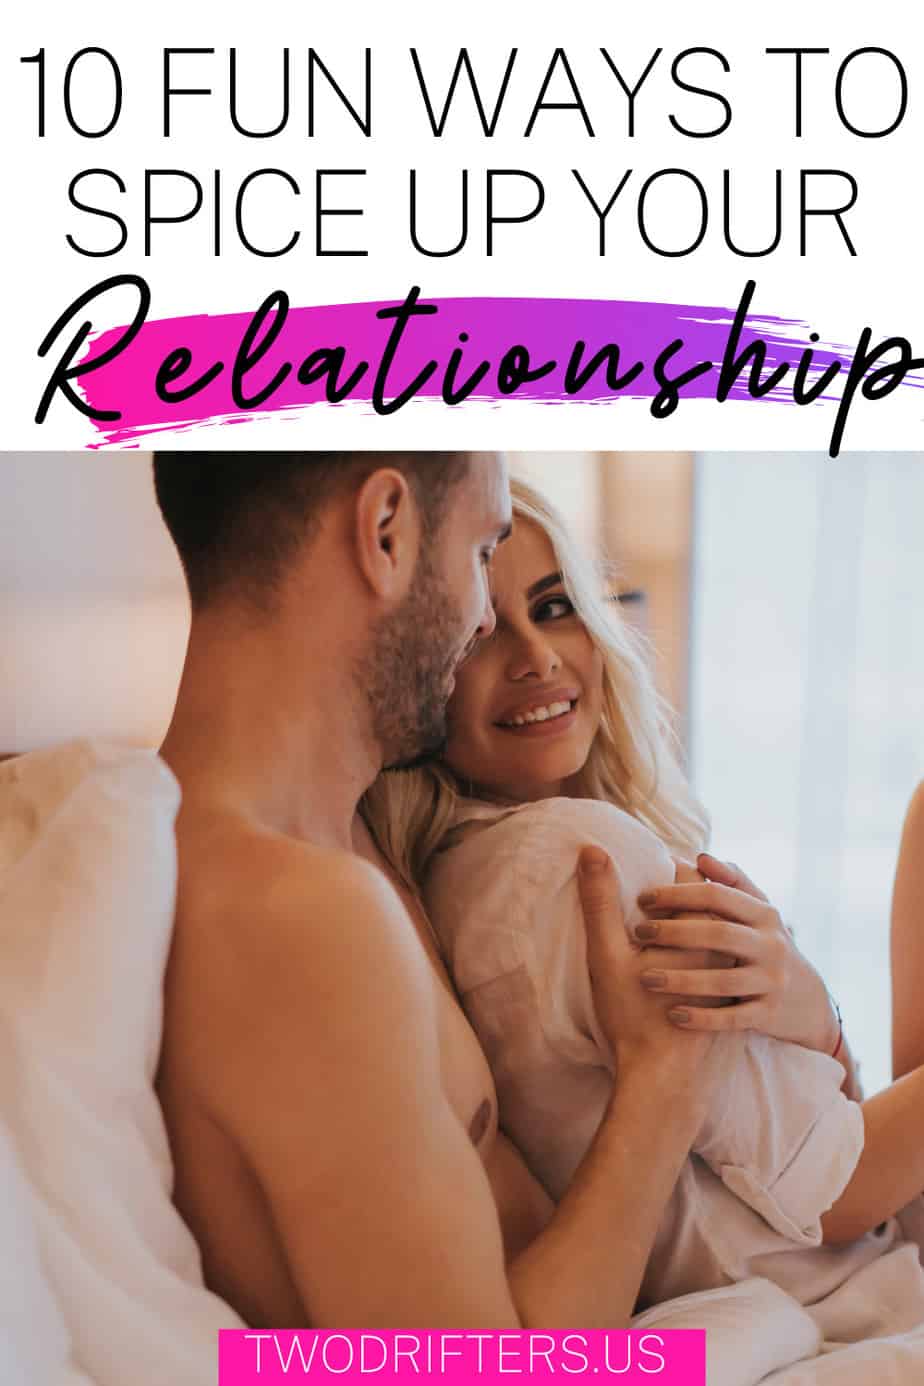 Pinterest social image that says “10 fun ways to spice up your relationship.”